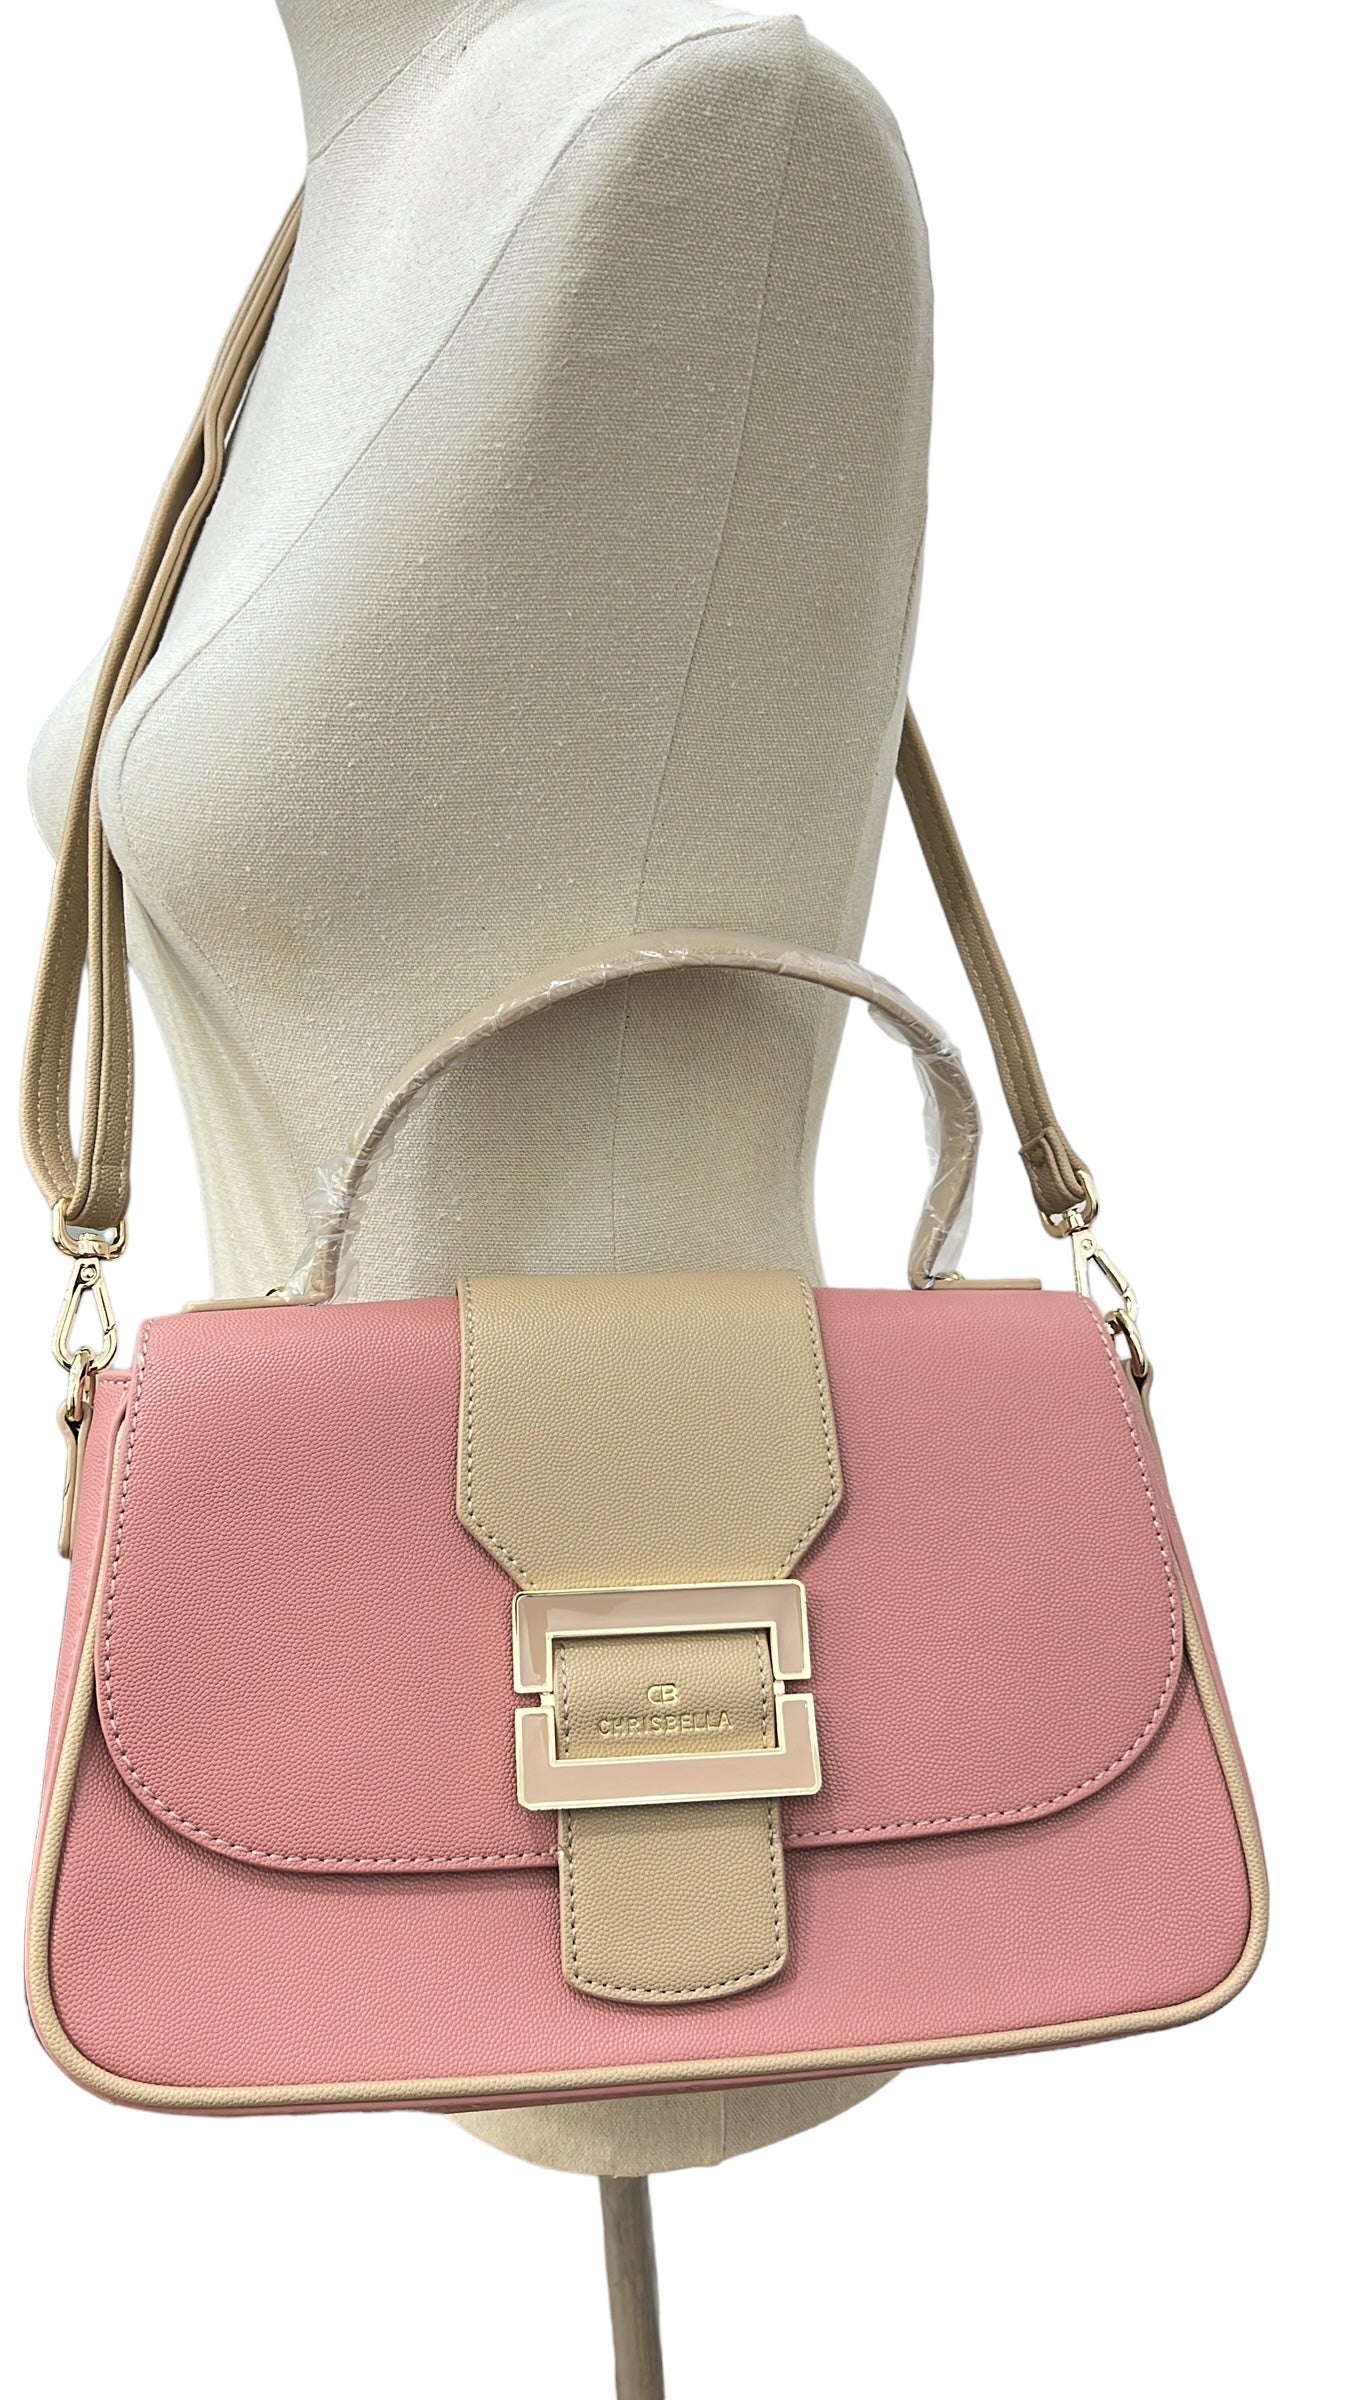 CHRISBELLA TEXTURED BUCKLE DETAIL TWO-TONE BAG IN PINK